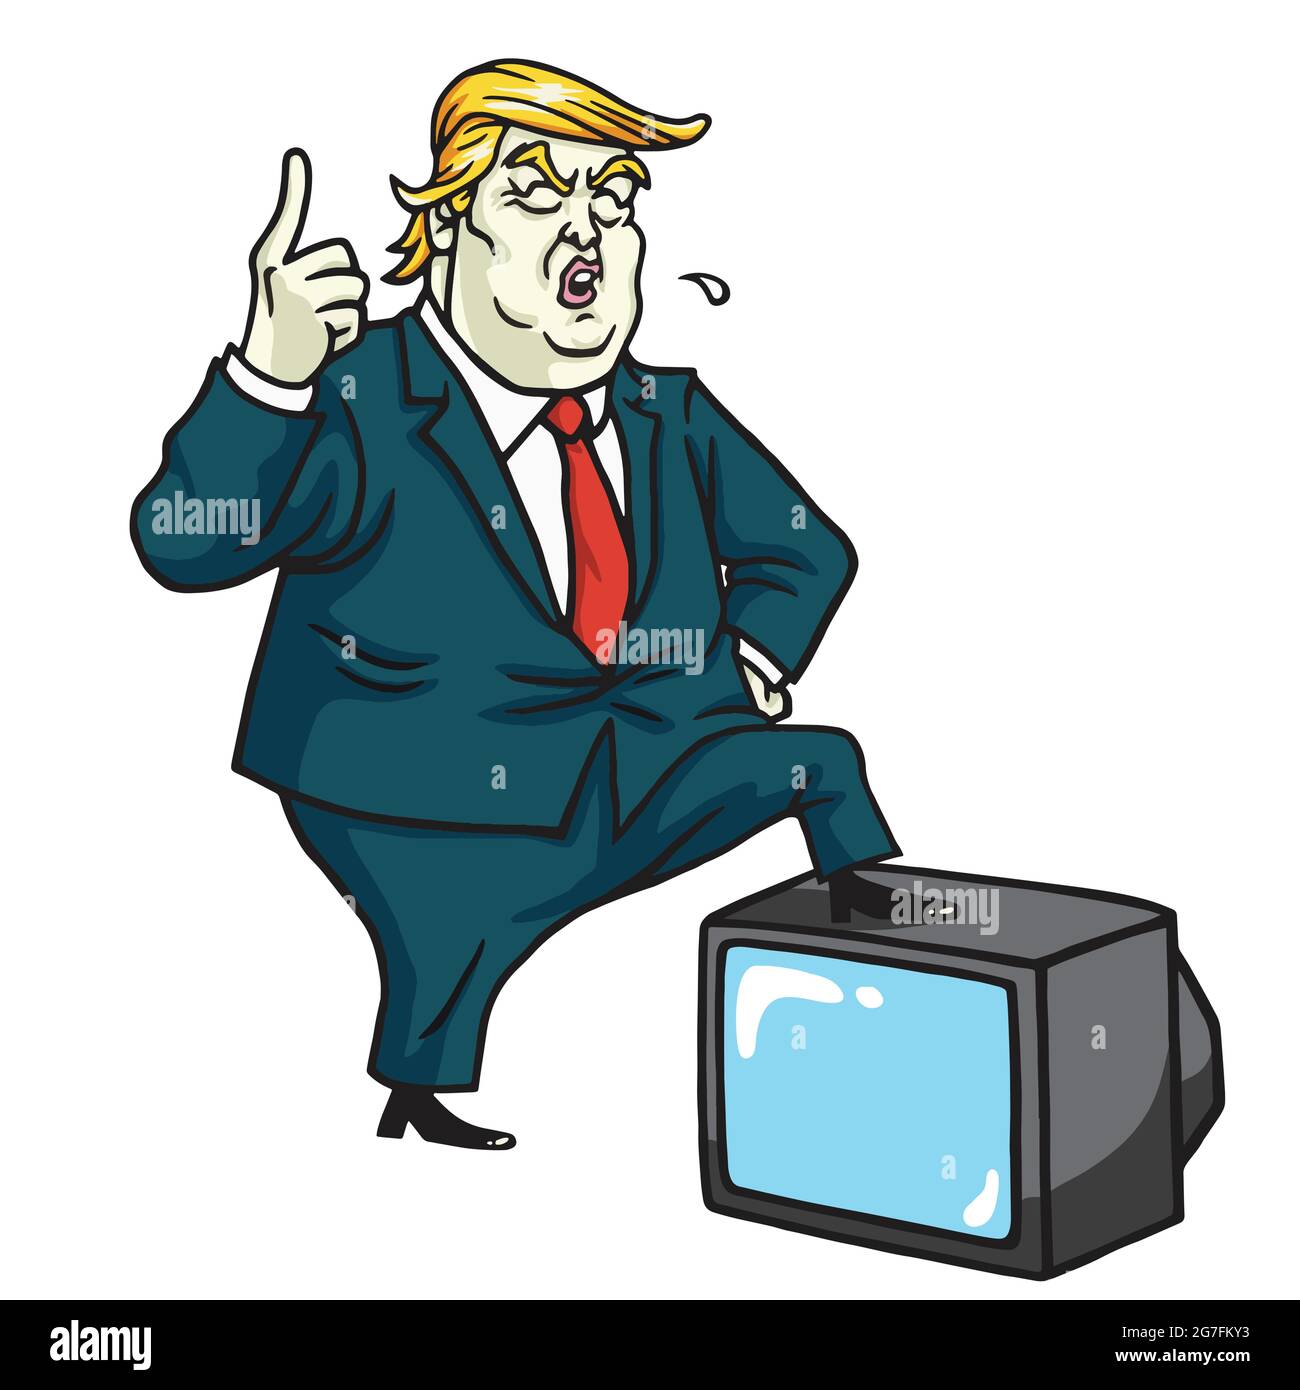 Donald Trump with Television. Cartoon Caricature Vector Illustration Stock Vector